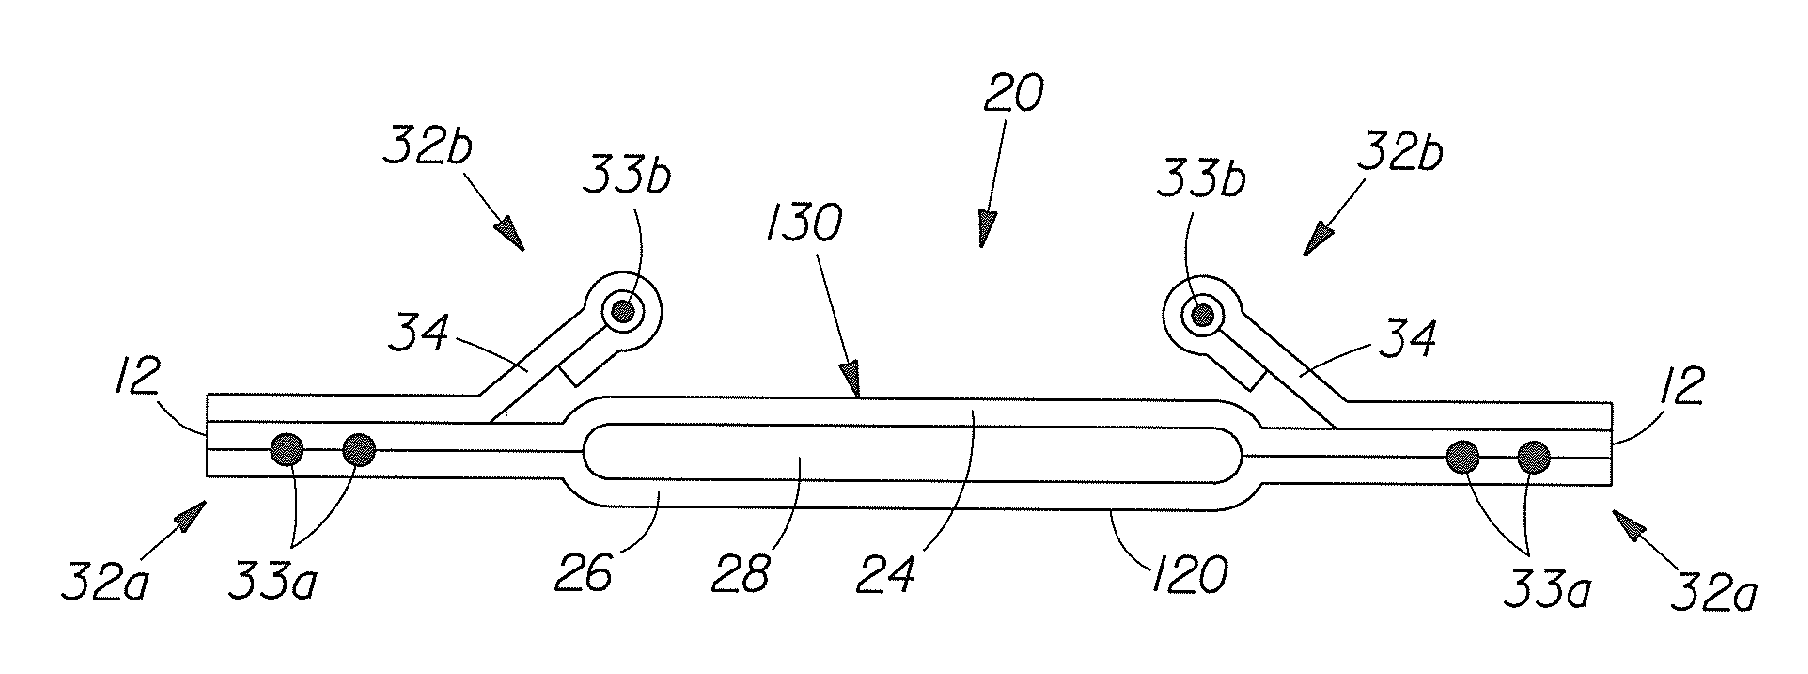 Absorbent Article Comprising A Synthetic Polymer Derived From A Renewable Resource And Methods Of Producing Said Article